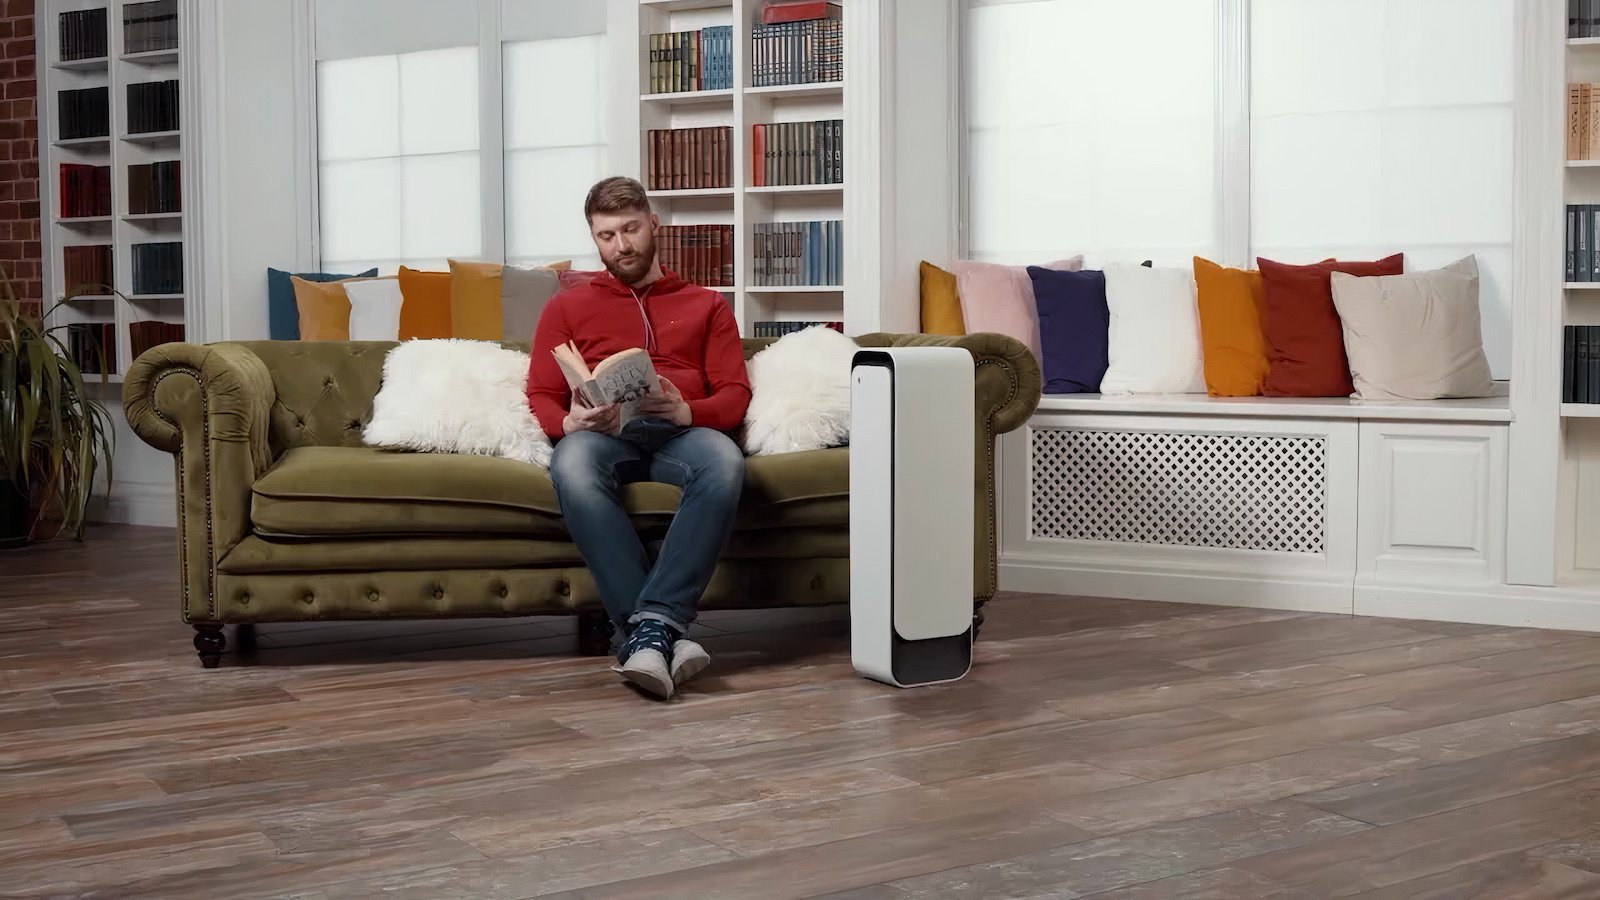 Heatbit smart heater has a user-friendly approach to mine Bitcoin while warming a room